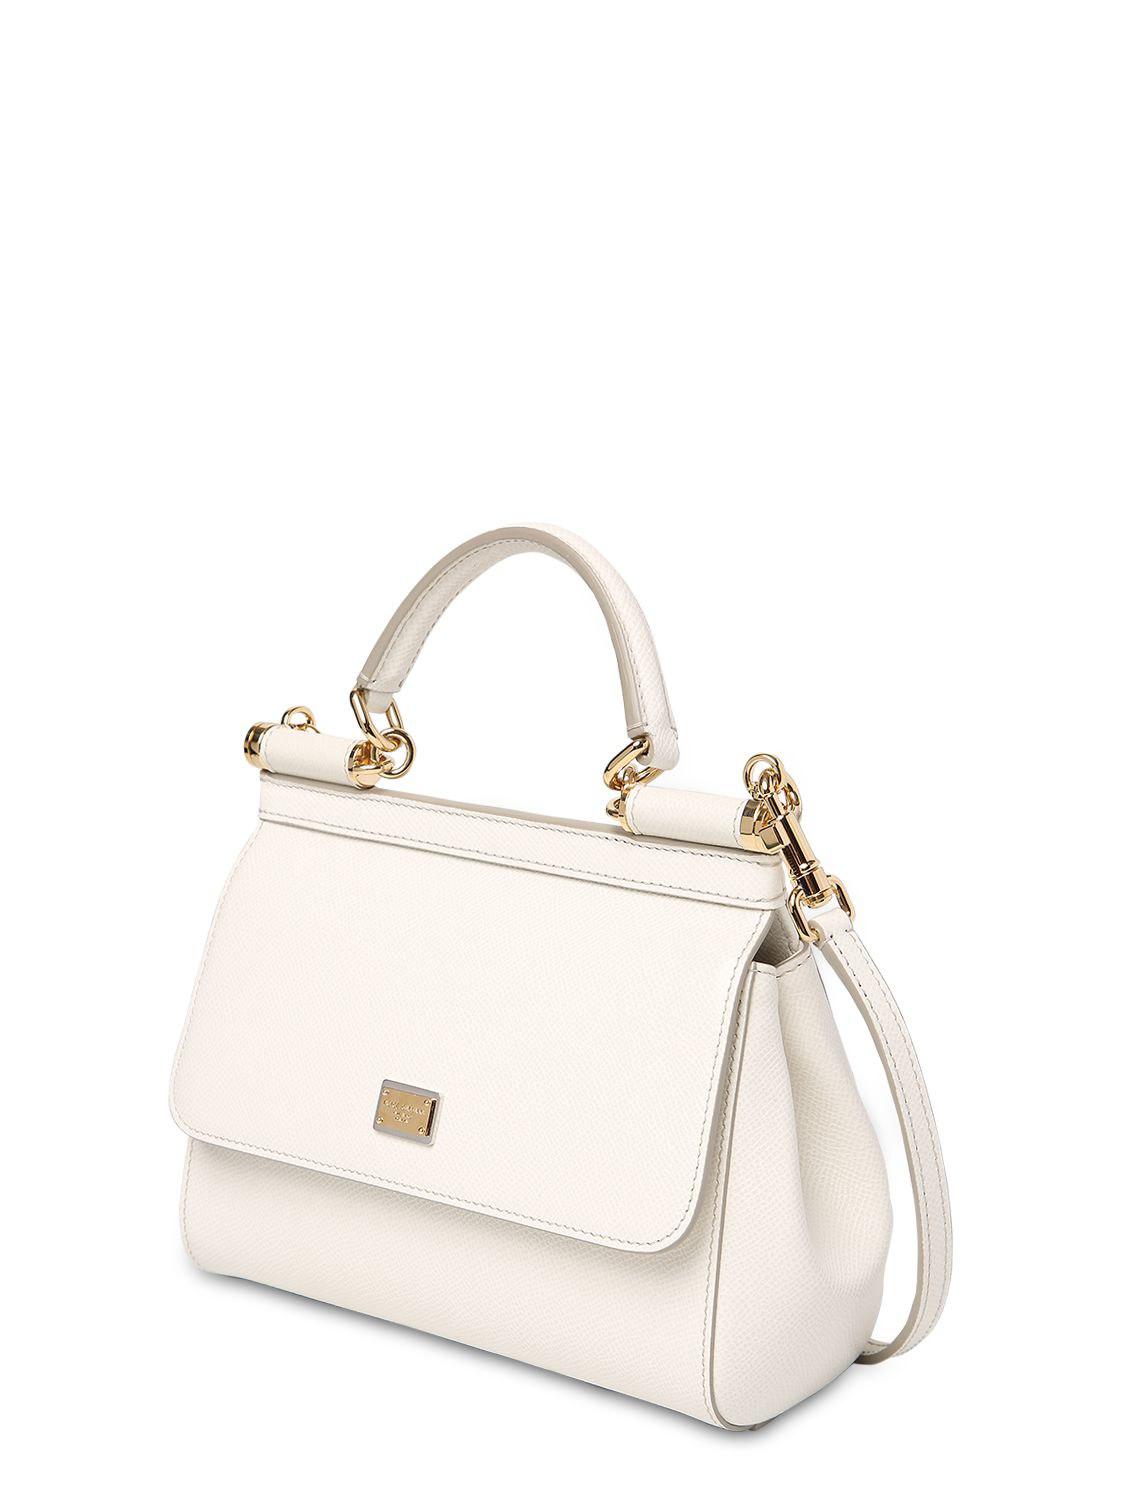 Dolce & Gabbana Small Sicily Dauphine Leather Bag in White - Lyst